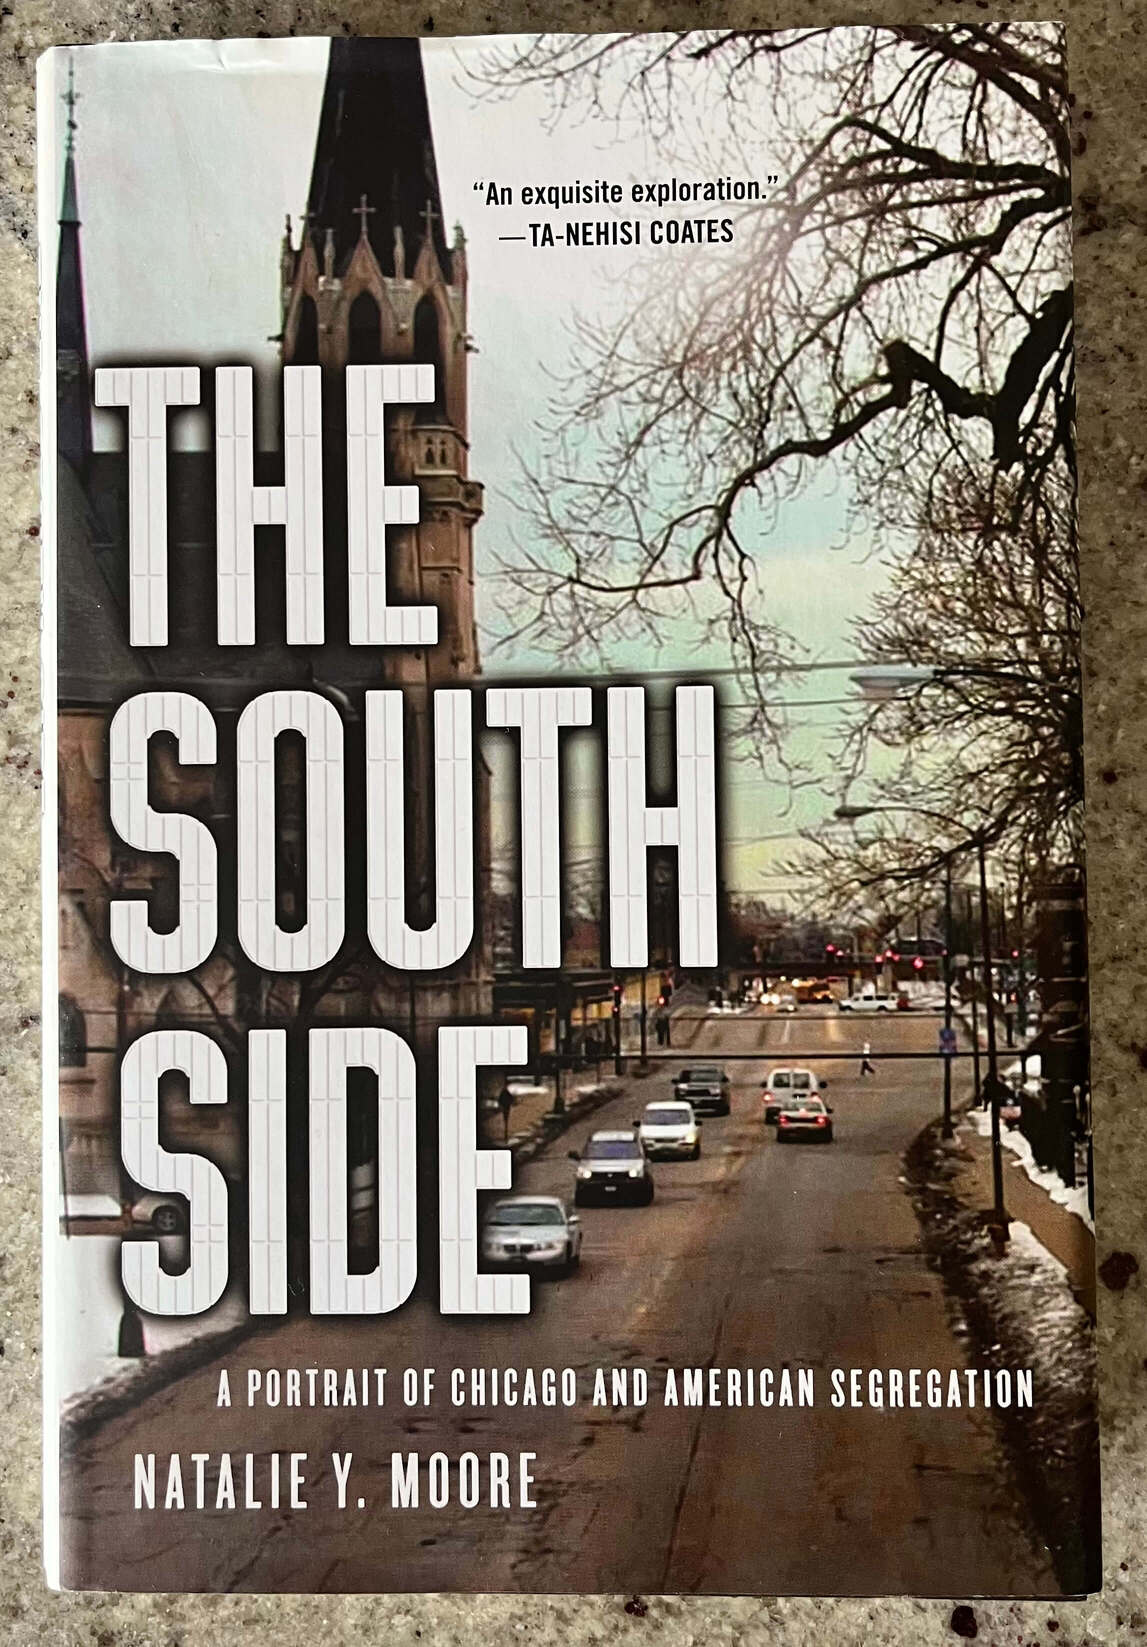 “The South Side: A Portrait of Chicago and American Segregation” by Natalie Y. Moore.